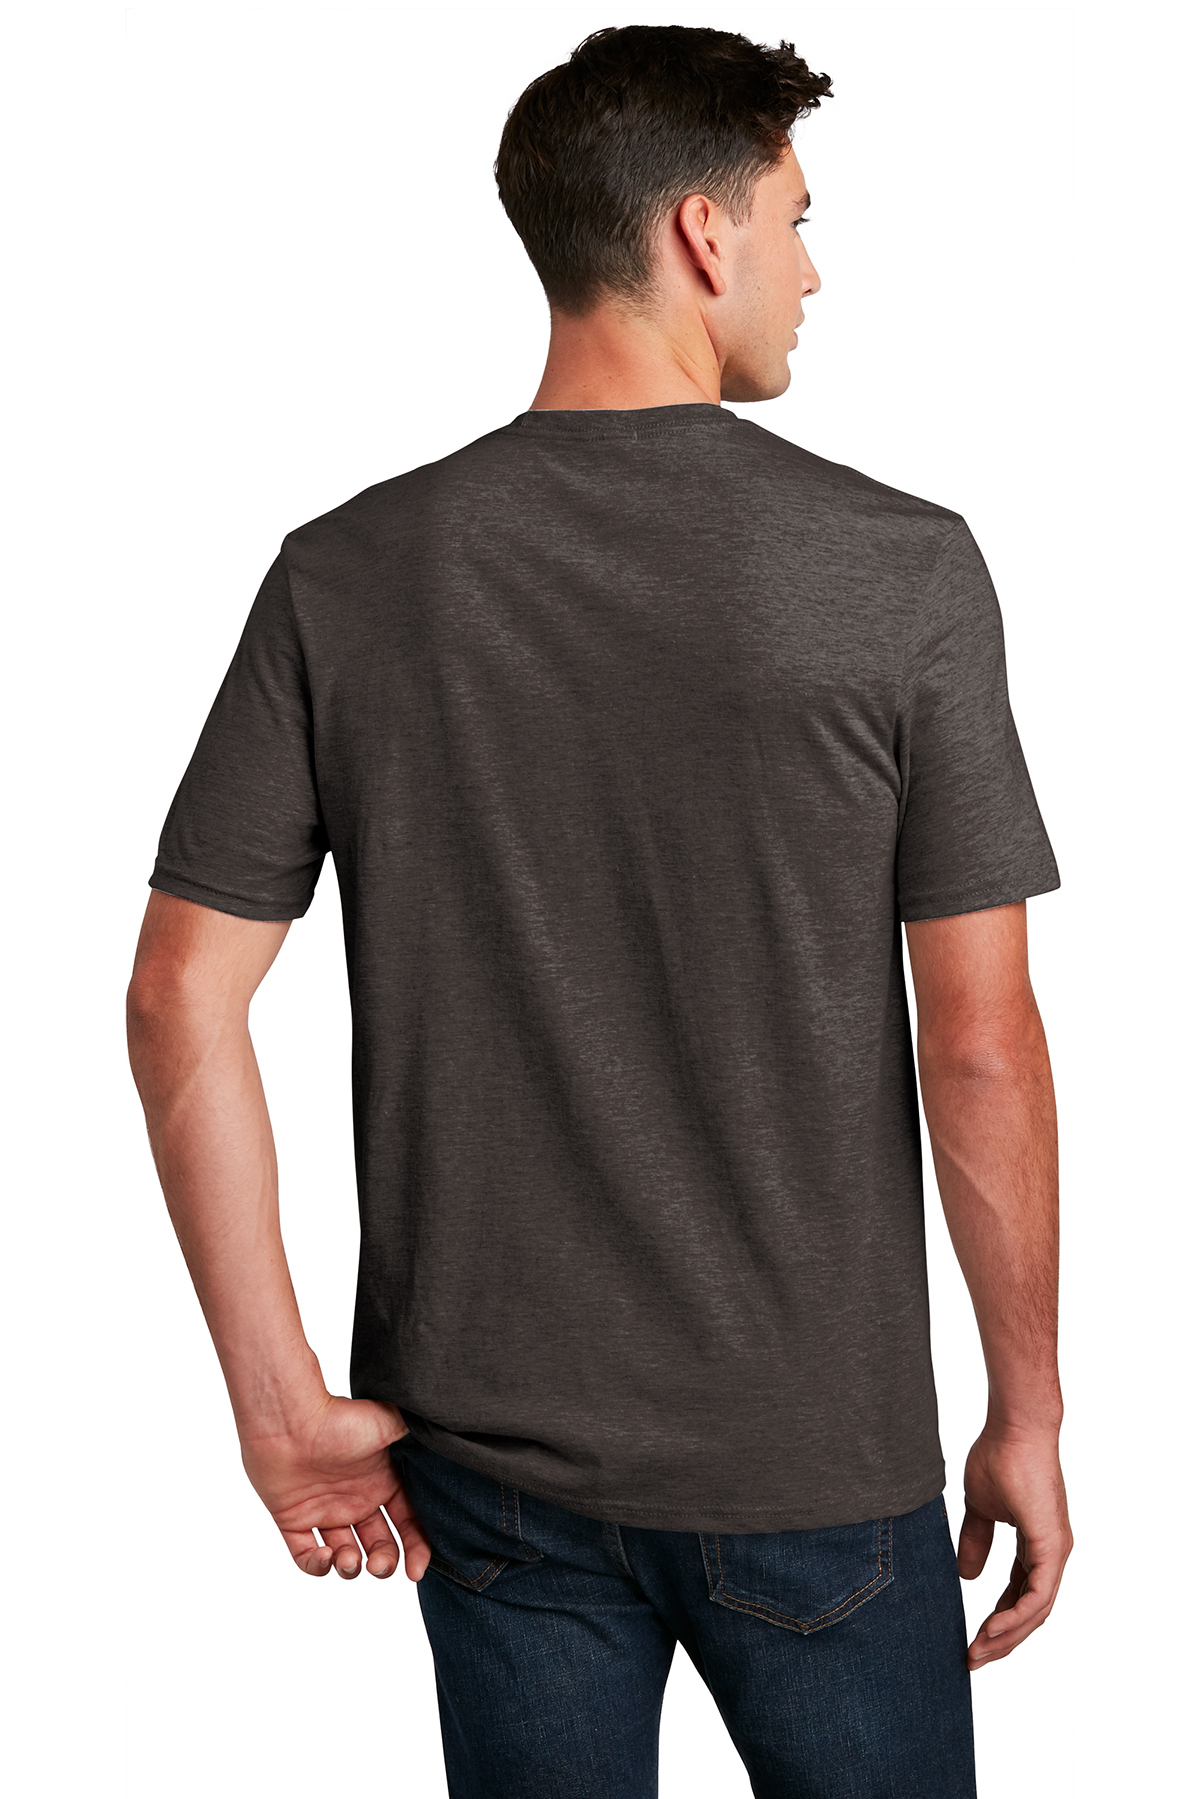 District Perfect Blend CVC Tee | Product | District